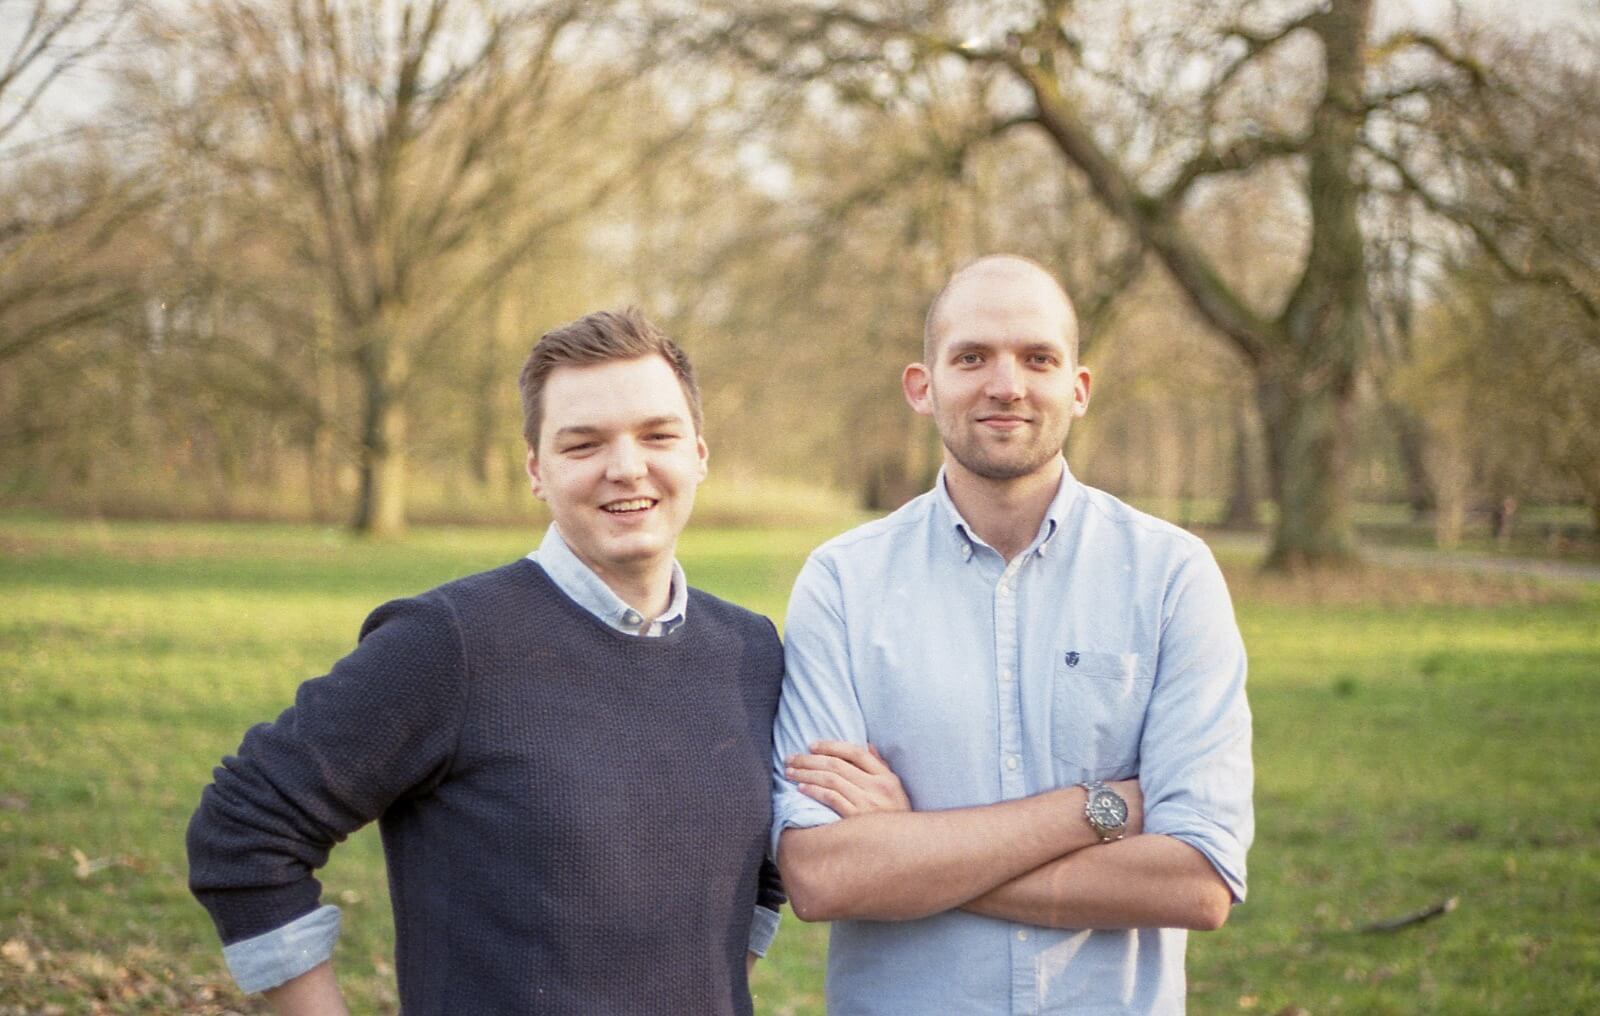 Fabian Solf and Christopher Feist the founders of Papair in natur